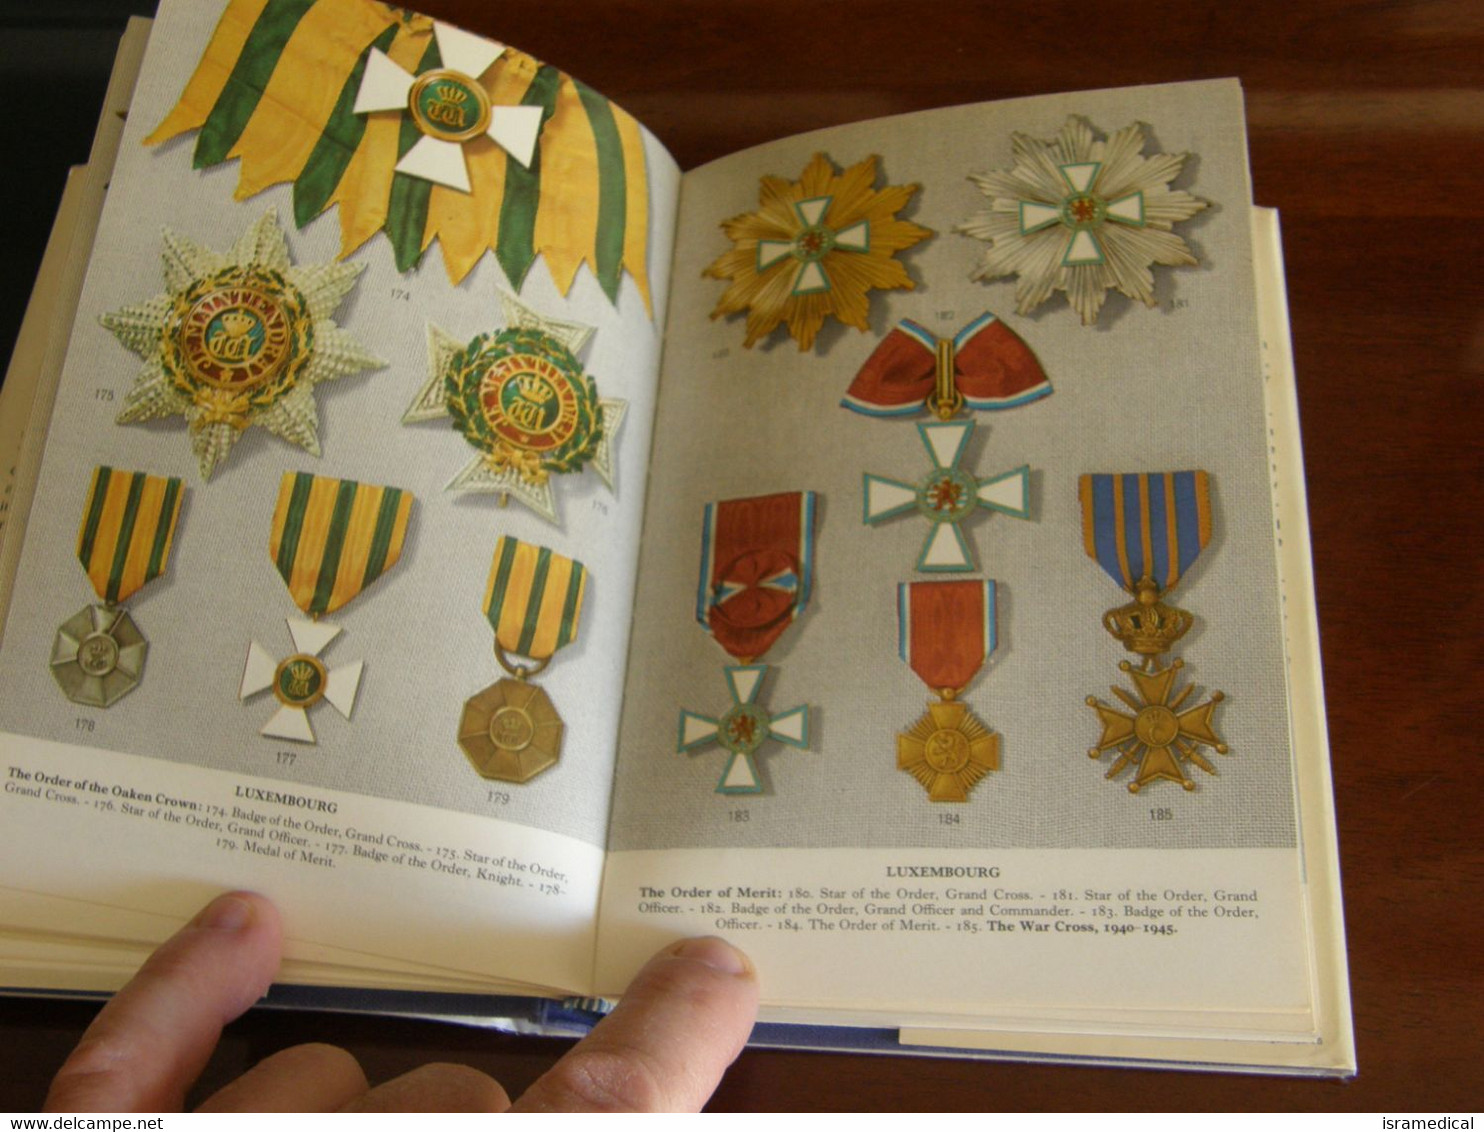 ORDERS AND DECORATIONS OF EUROPE IN COLOR MACMILLAN - Livres & CDs